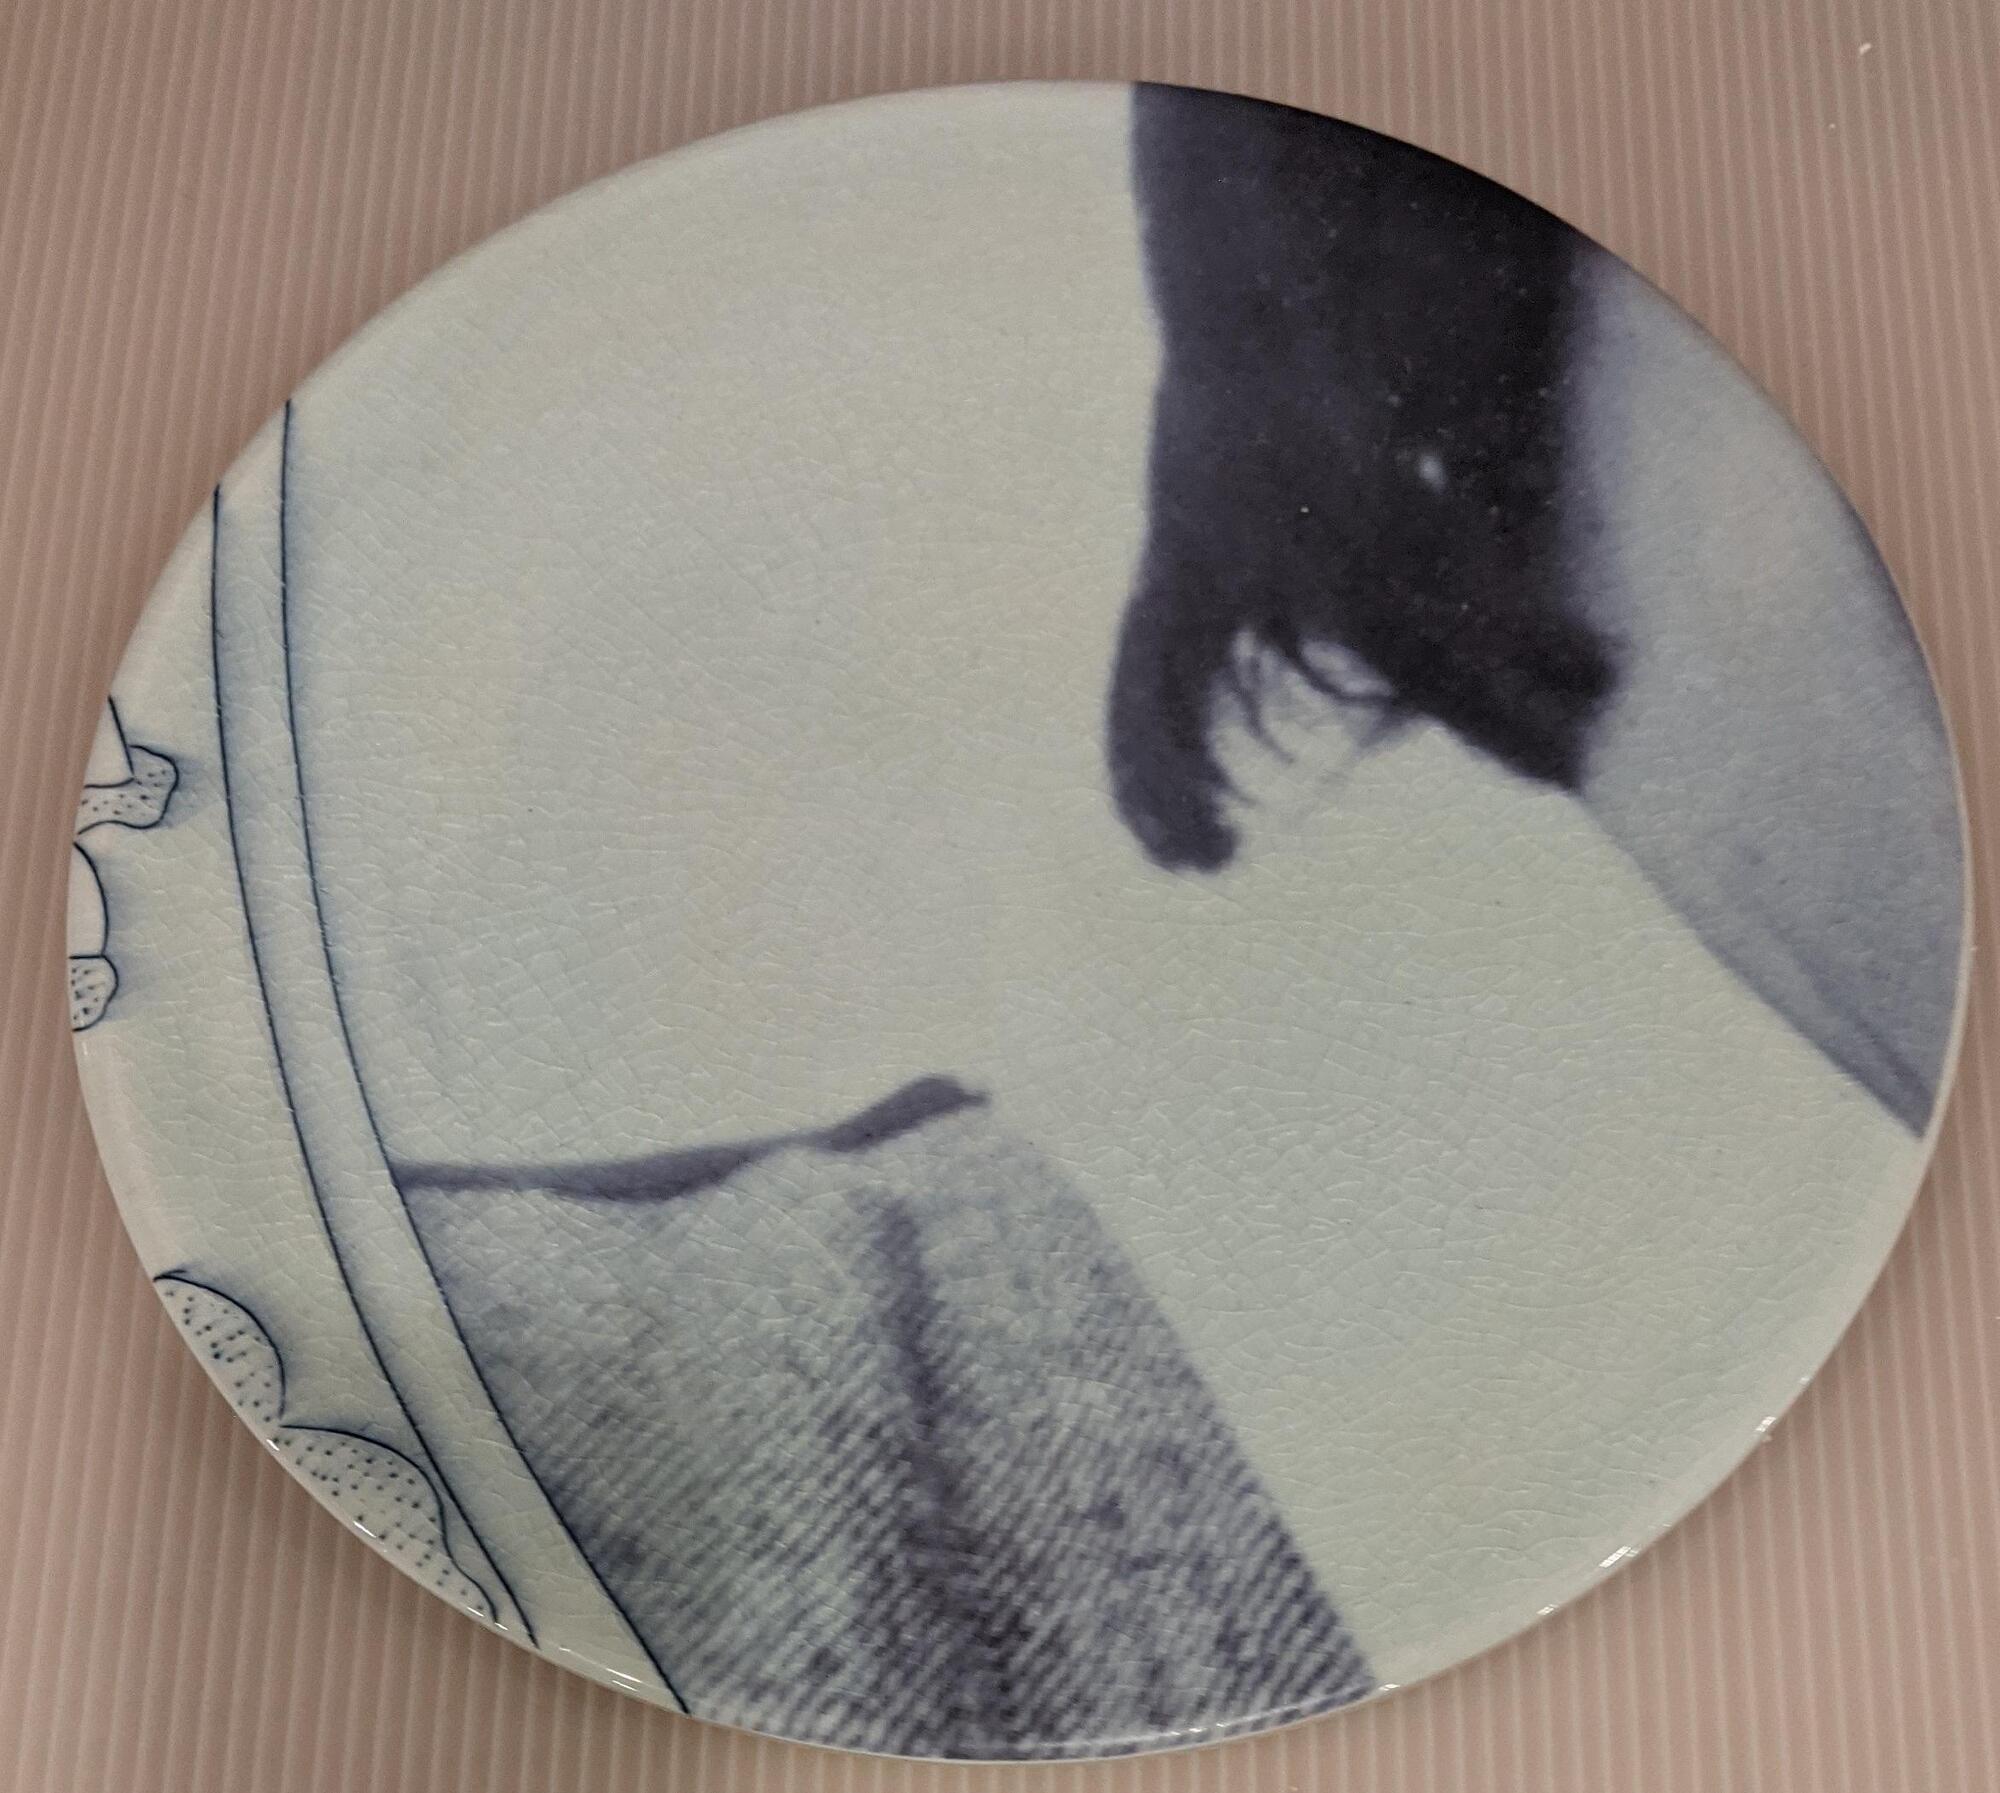 A plate from the center of the piece. A person&#39;s right shoulder and neck are visible. The person is wearing a textured jacket and white shirt. Their dark hair descends to the top of the shirt collar.&nbsp;